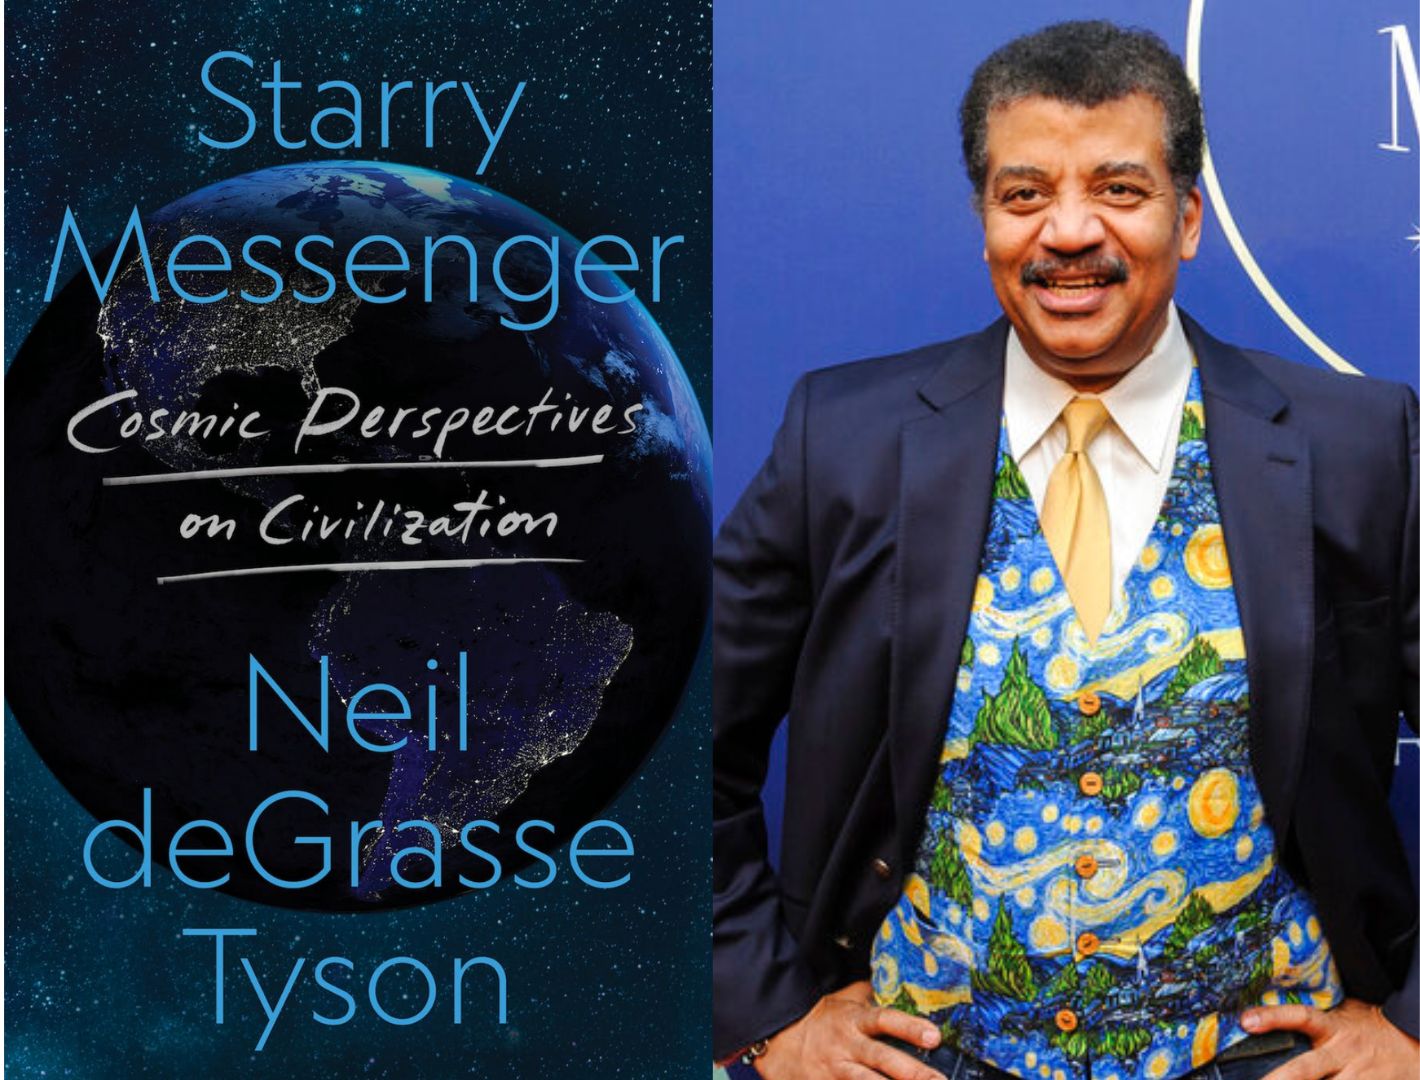 Cosmic perspectives with Neil deGrasse Tyson WHYY